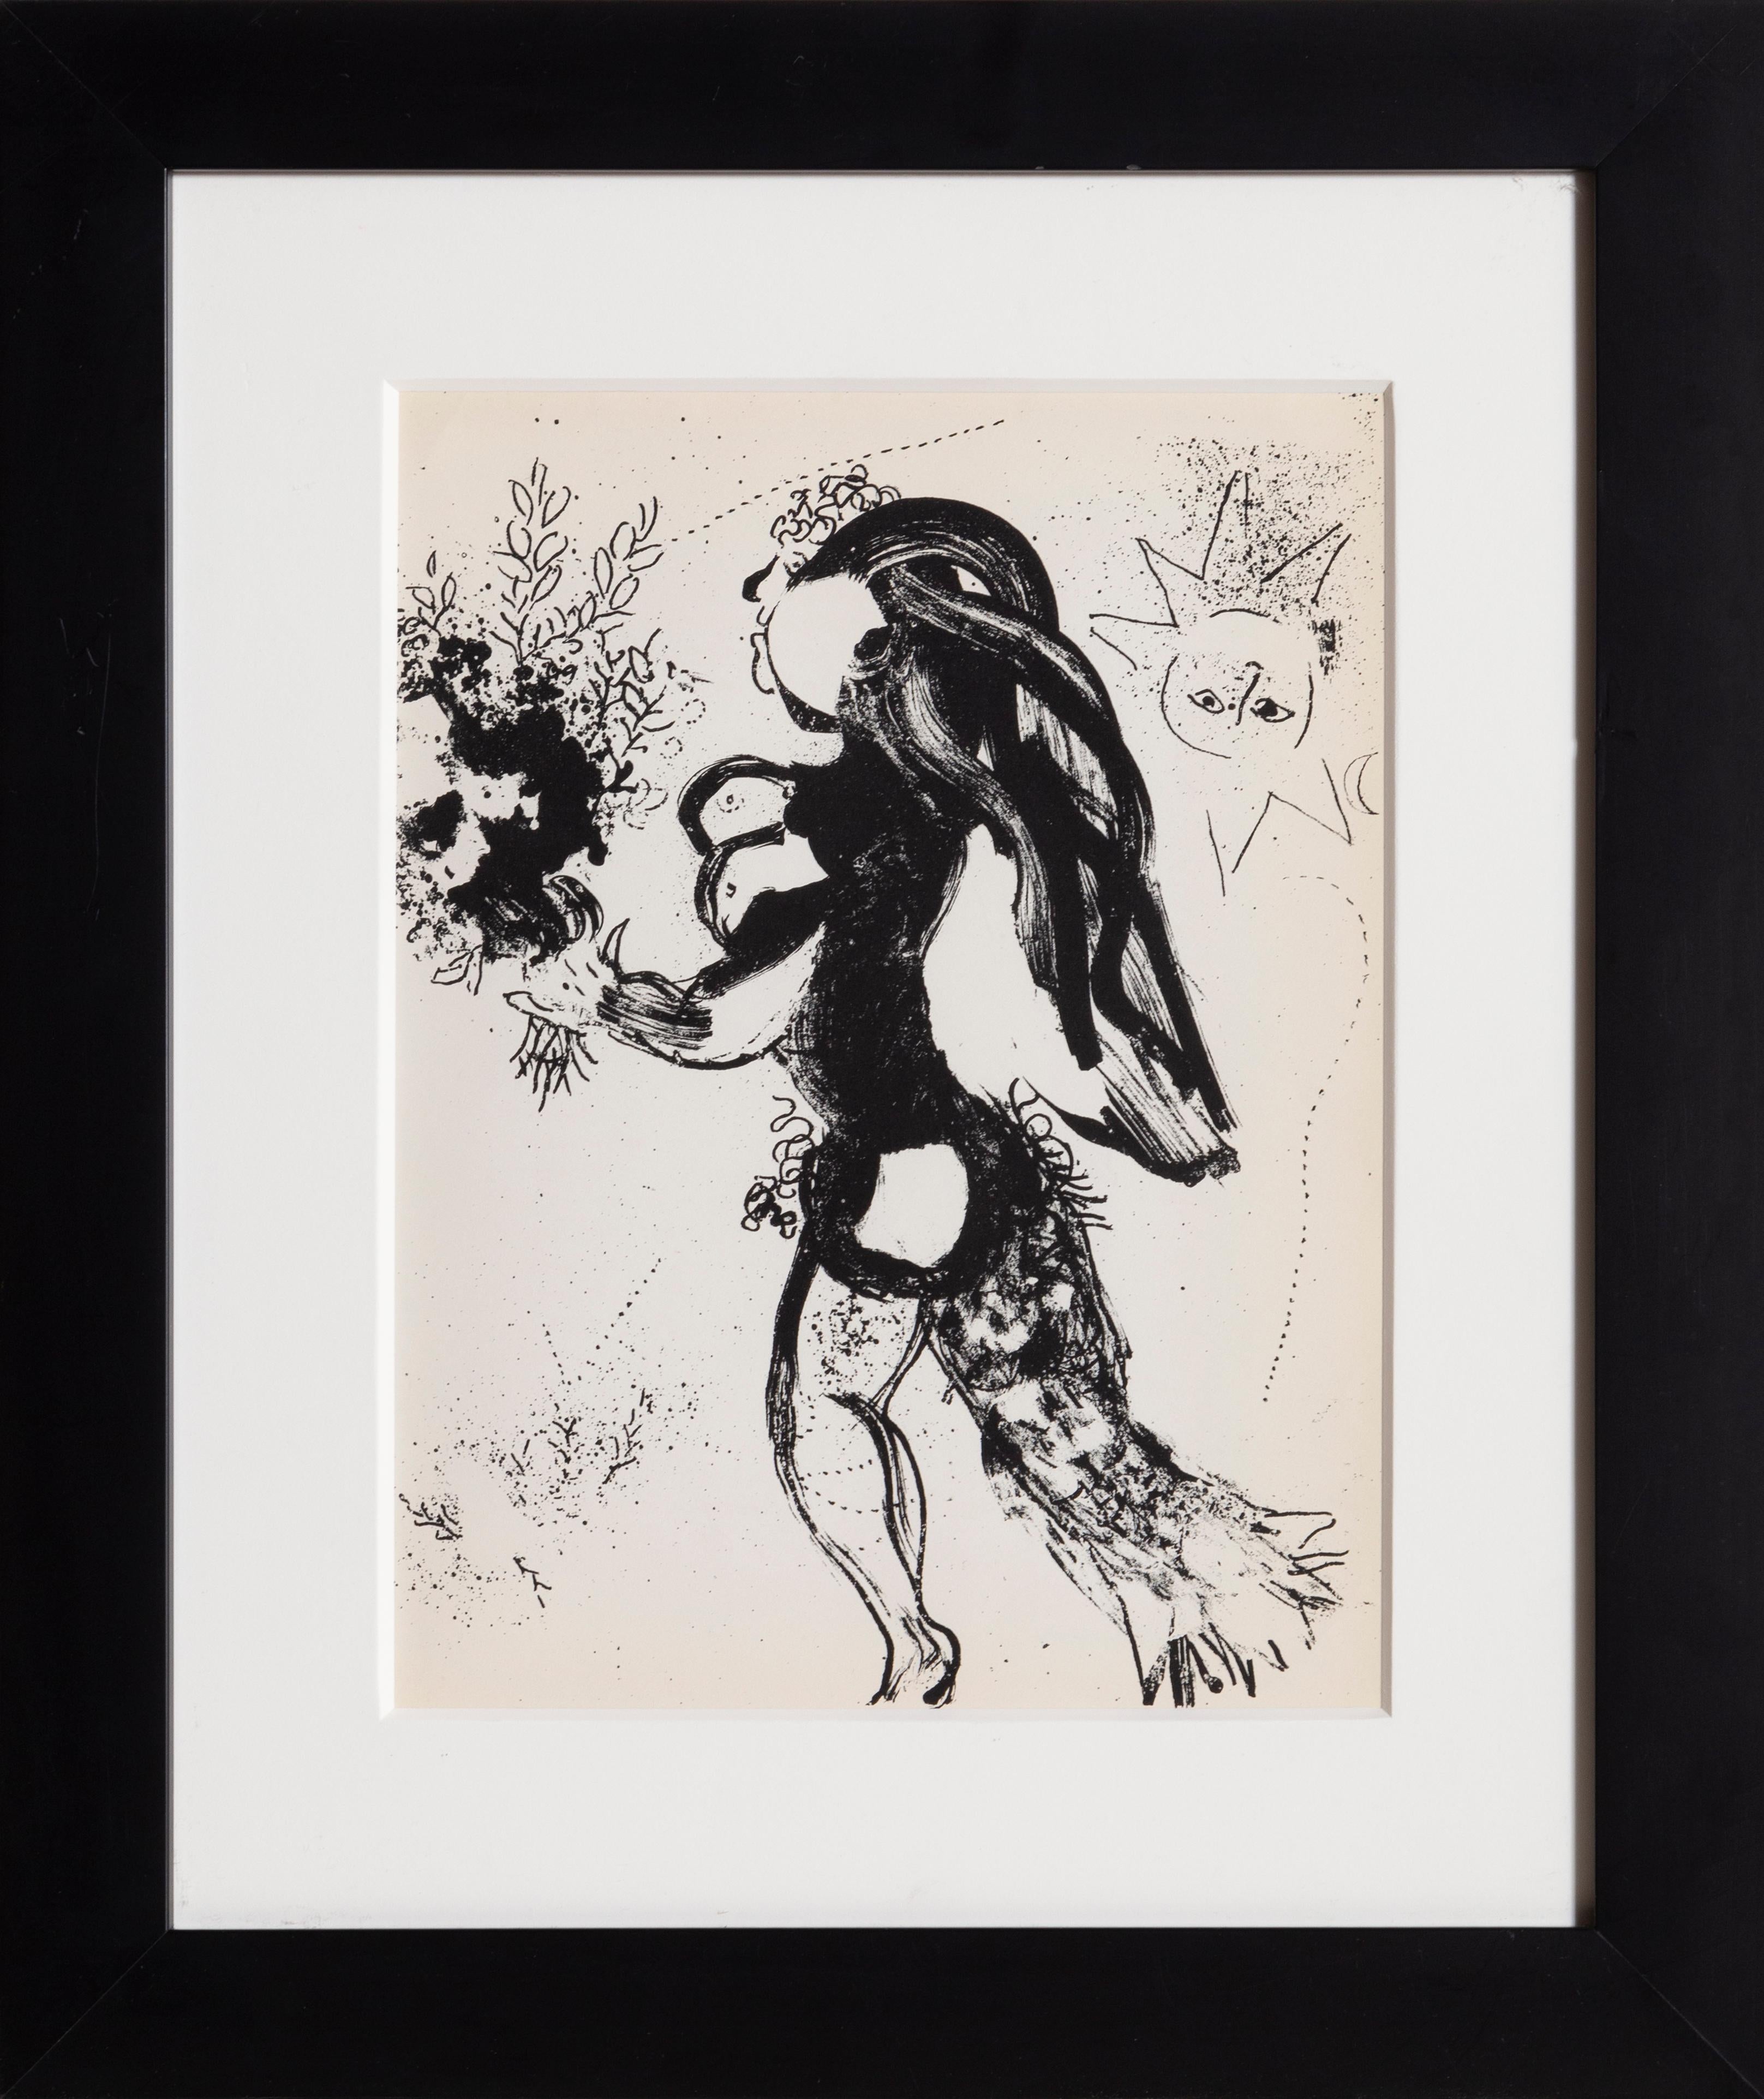 Offering, Framed Lithograph by Marc Chagall 1960